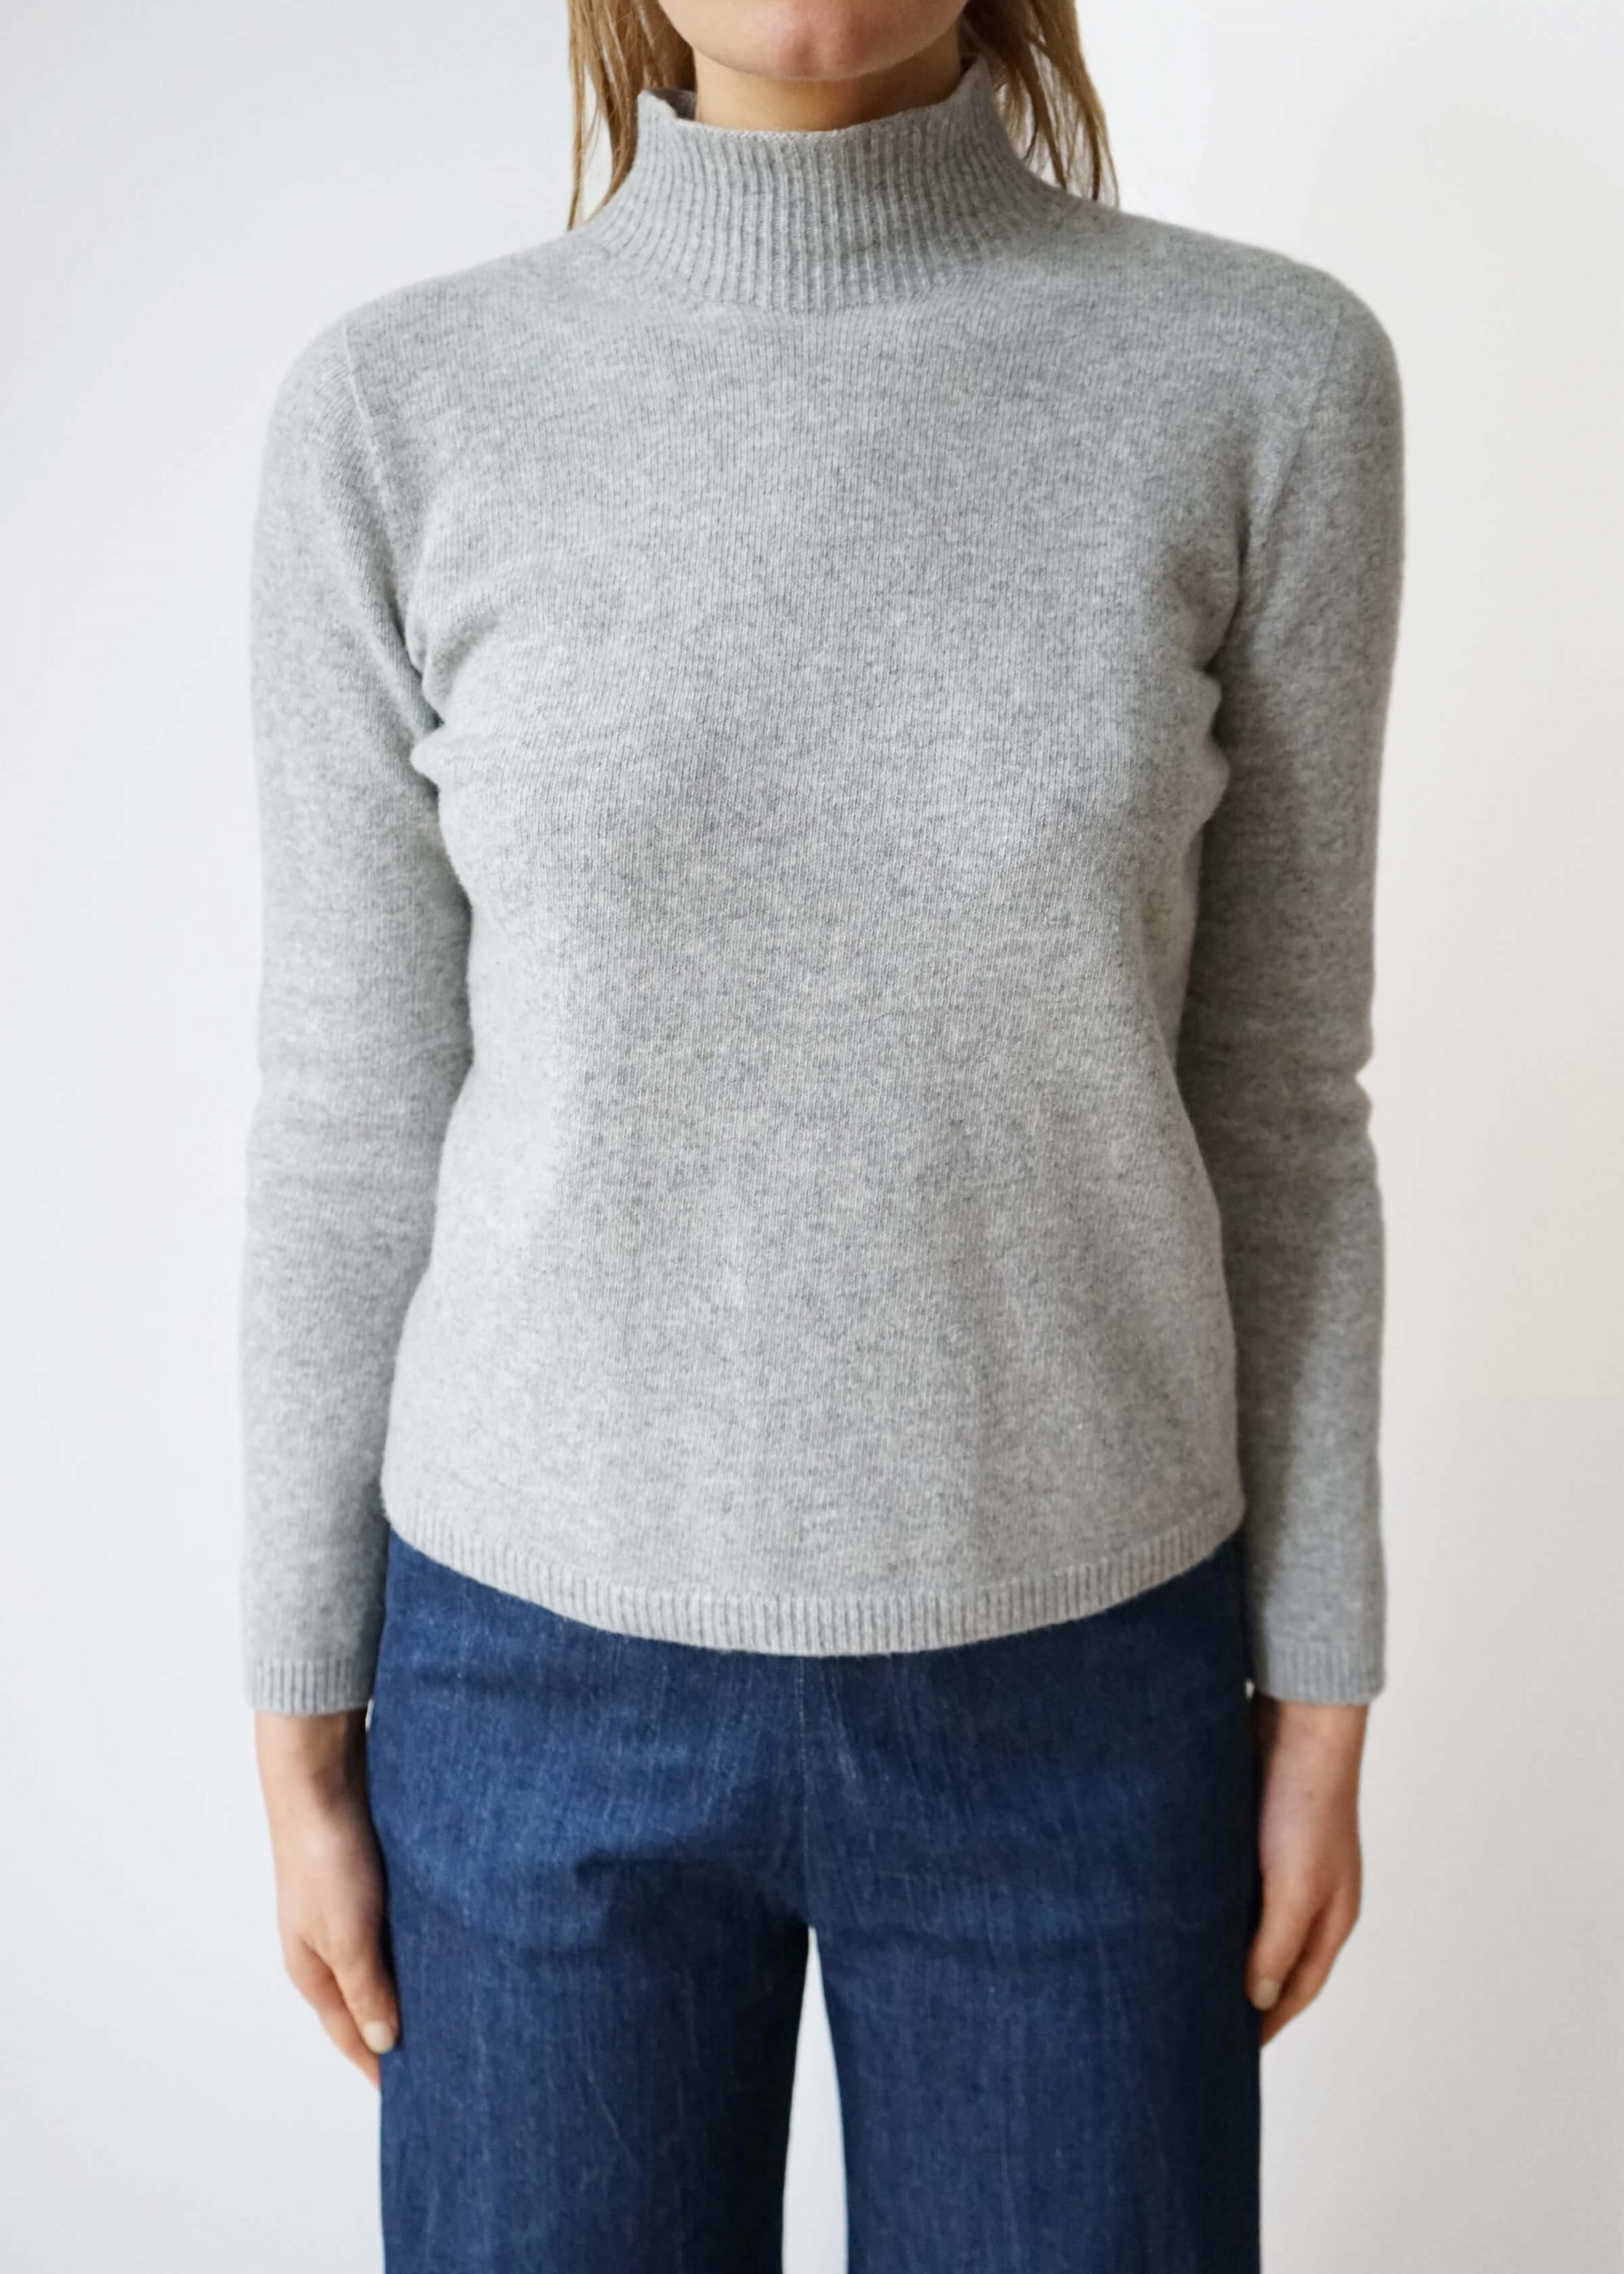 Product image for »Judd« Light Grey Polo-Neck Sweater Felted Cashmere Merino